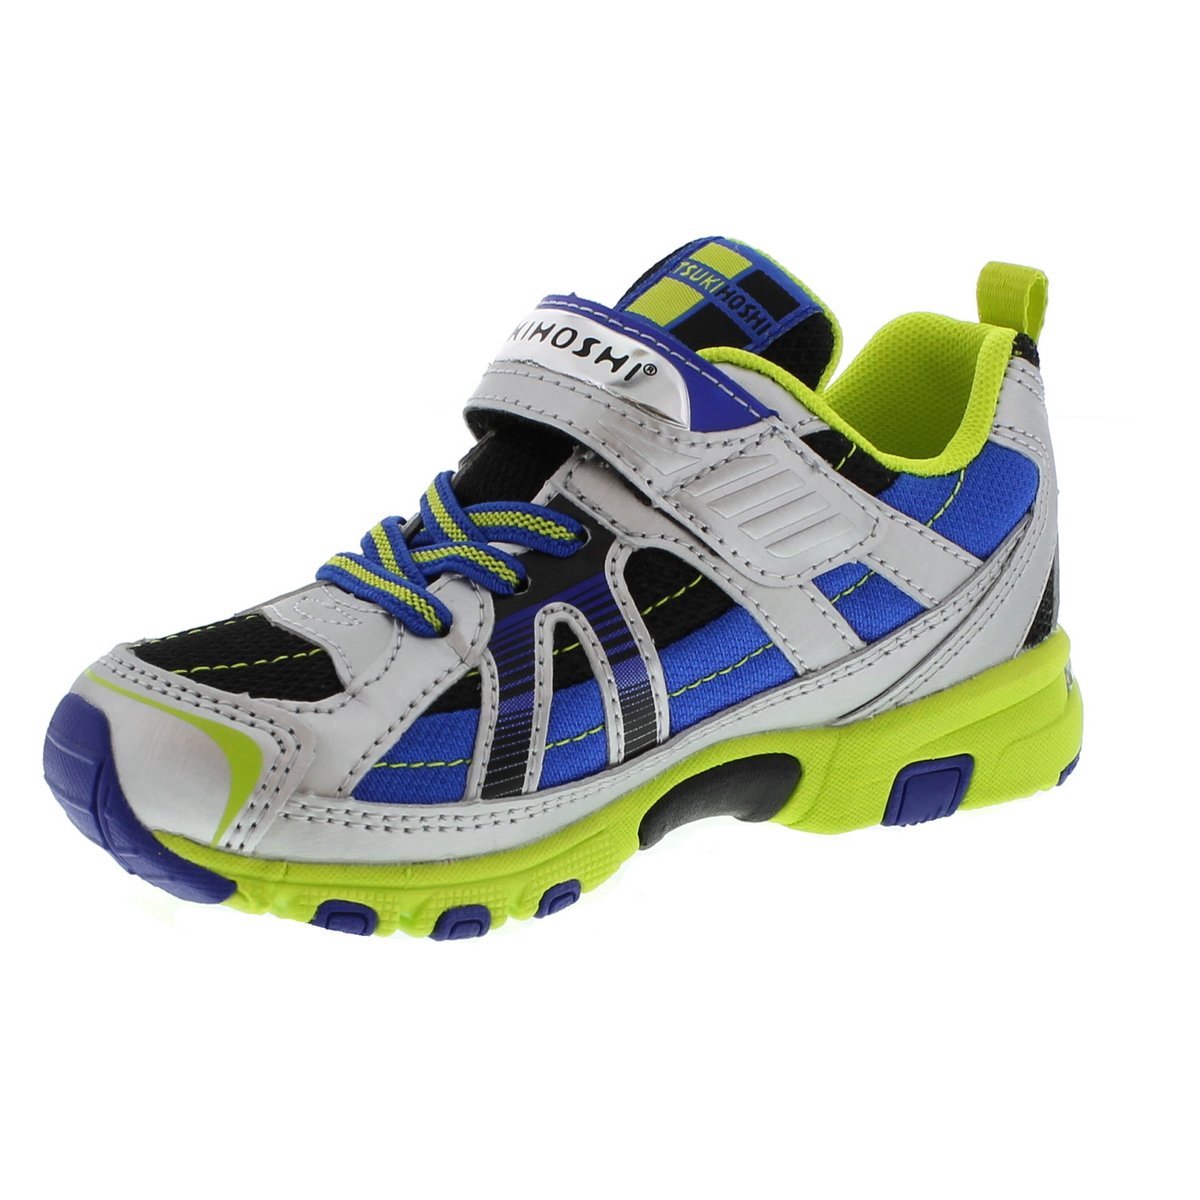 Child Tsukihoshi Storm Sneaker in Silver/Lime from the front view